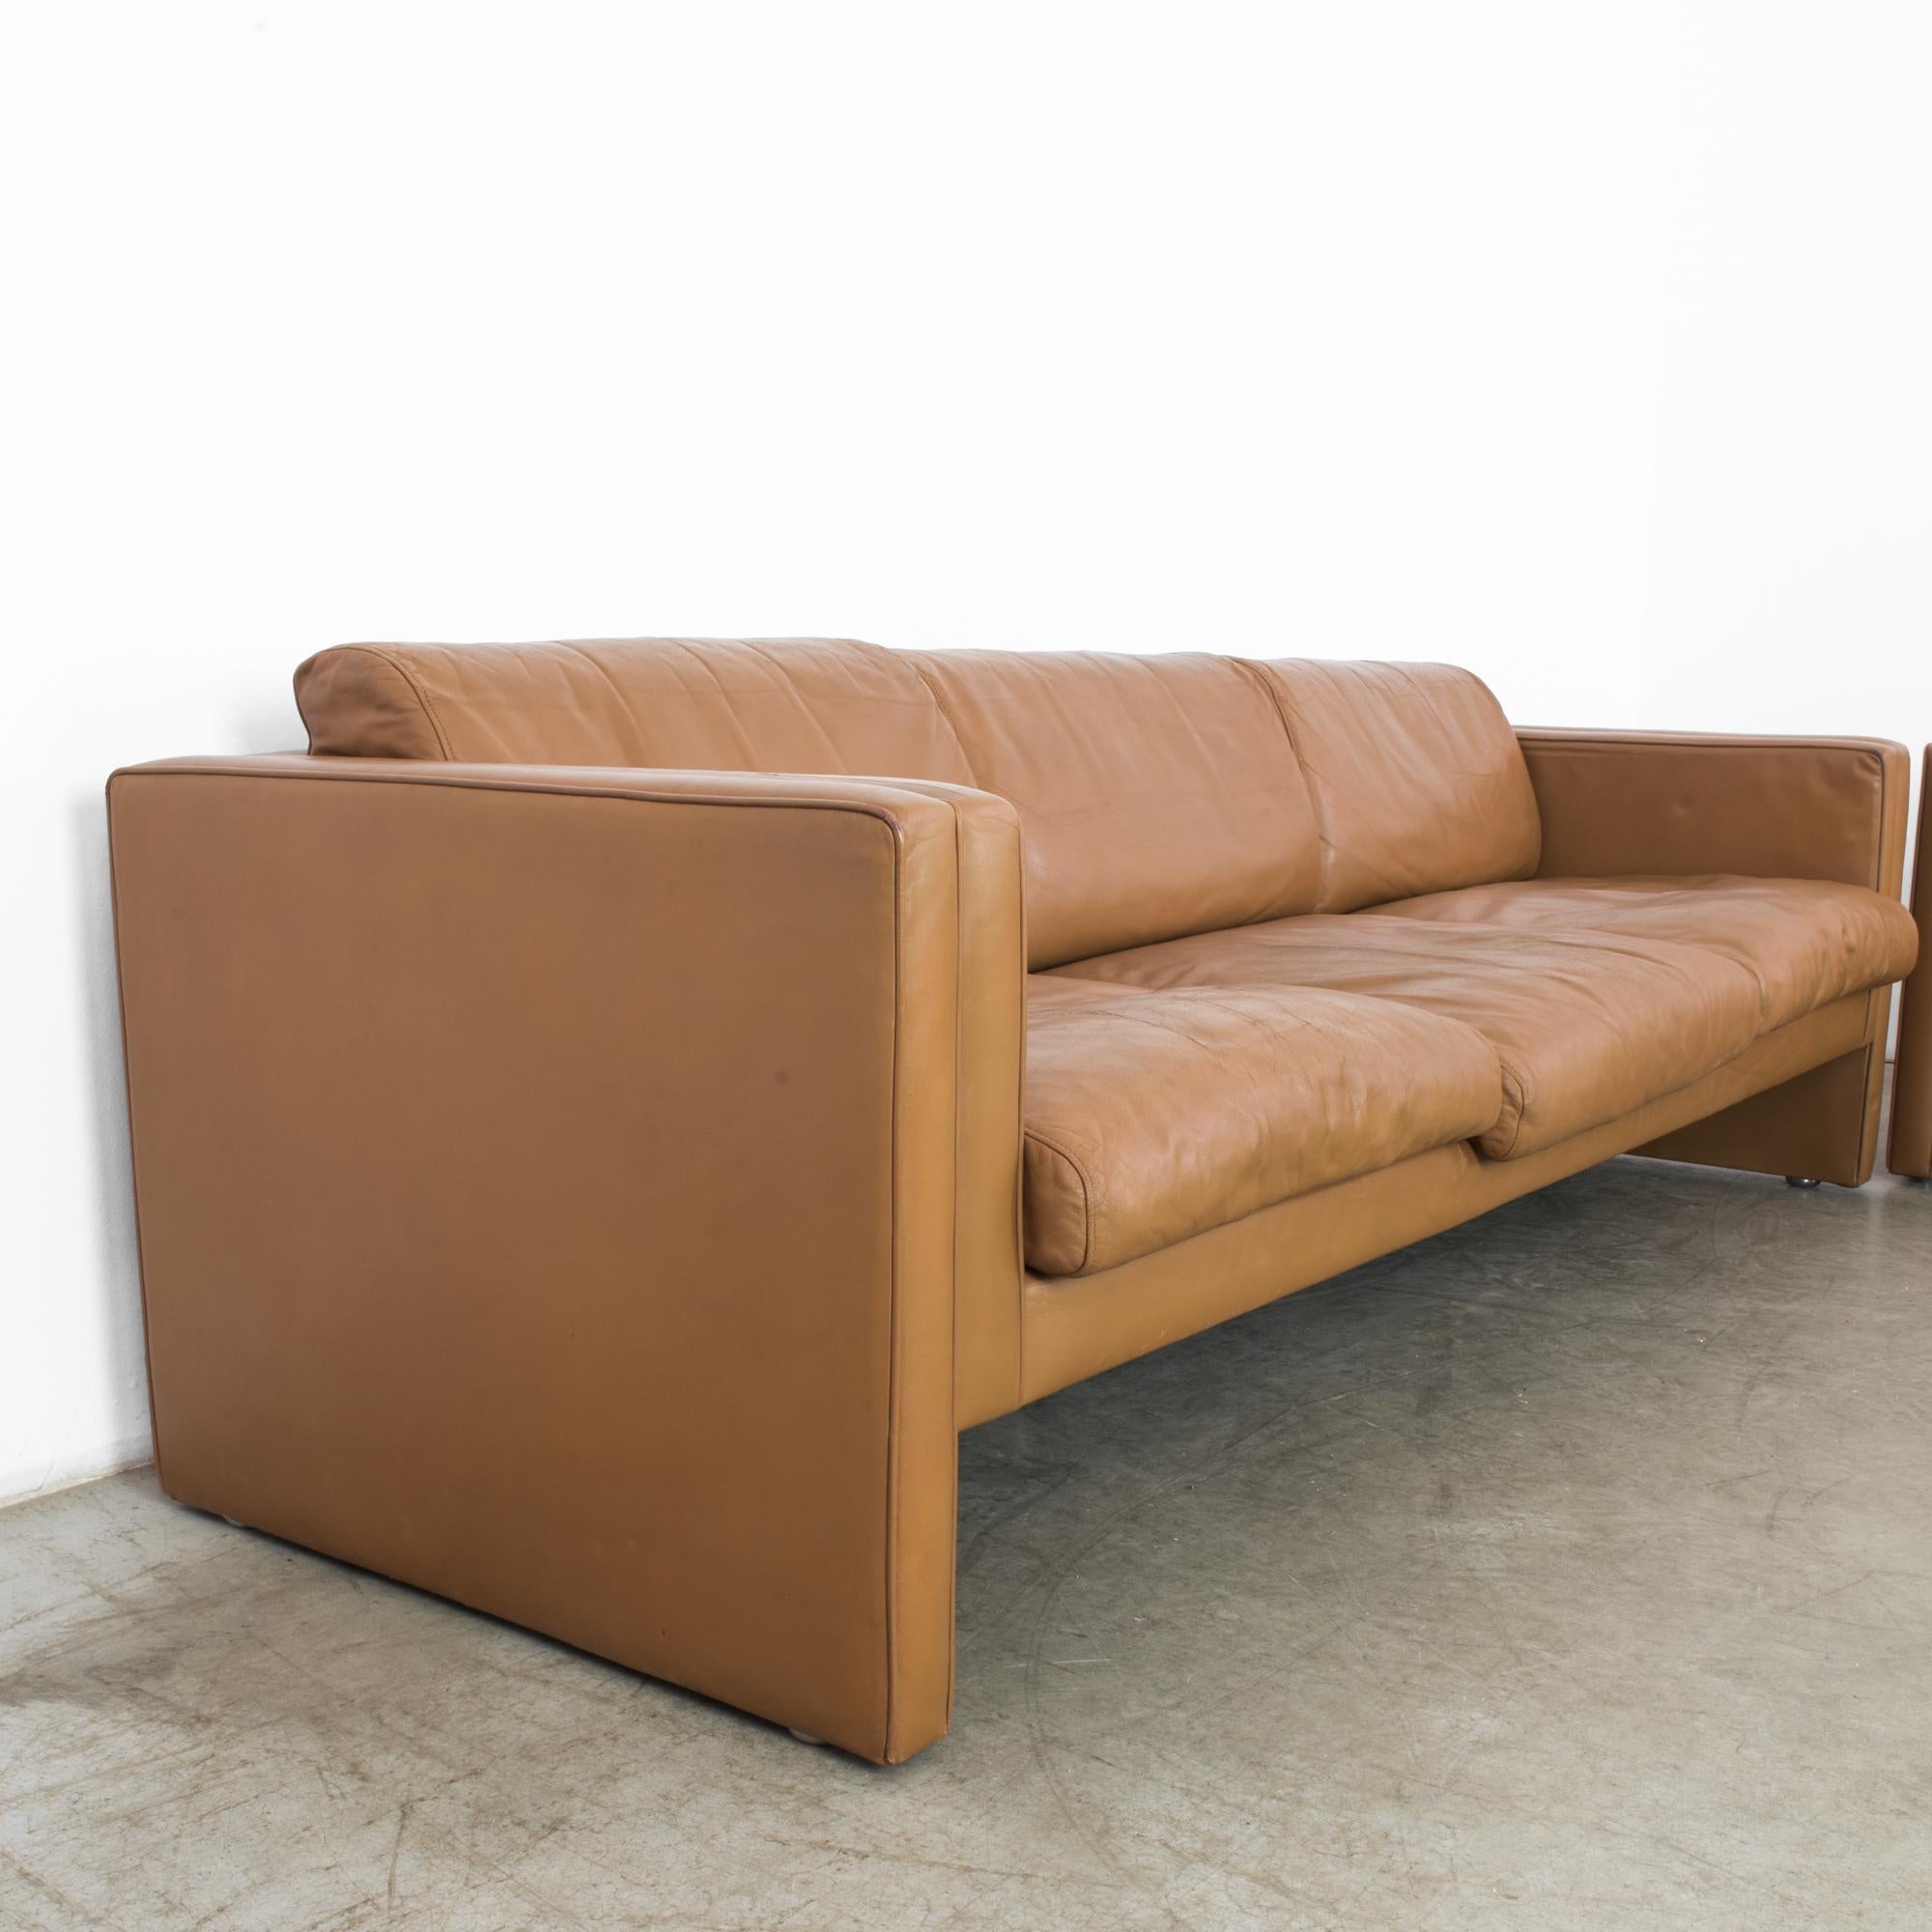 1960s Knoll Leather Sofas, a Pair 1